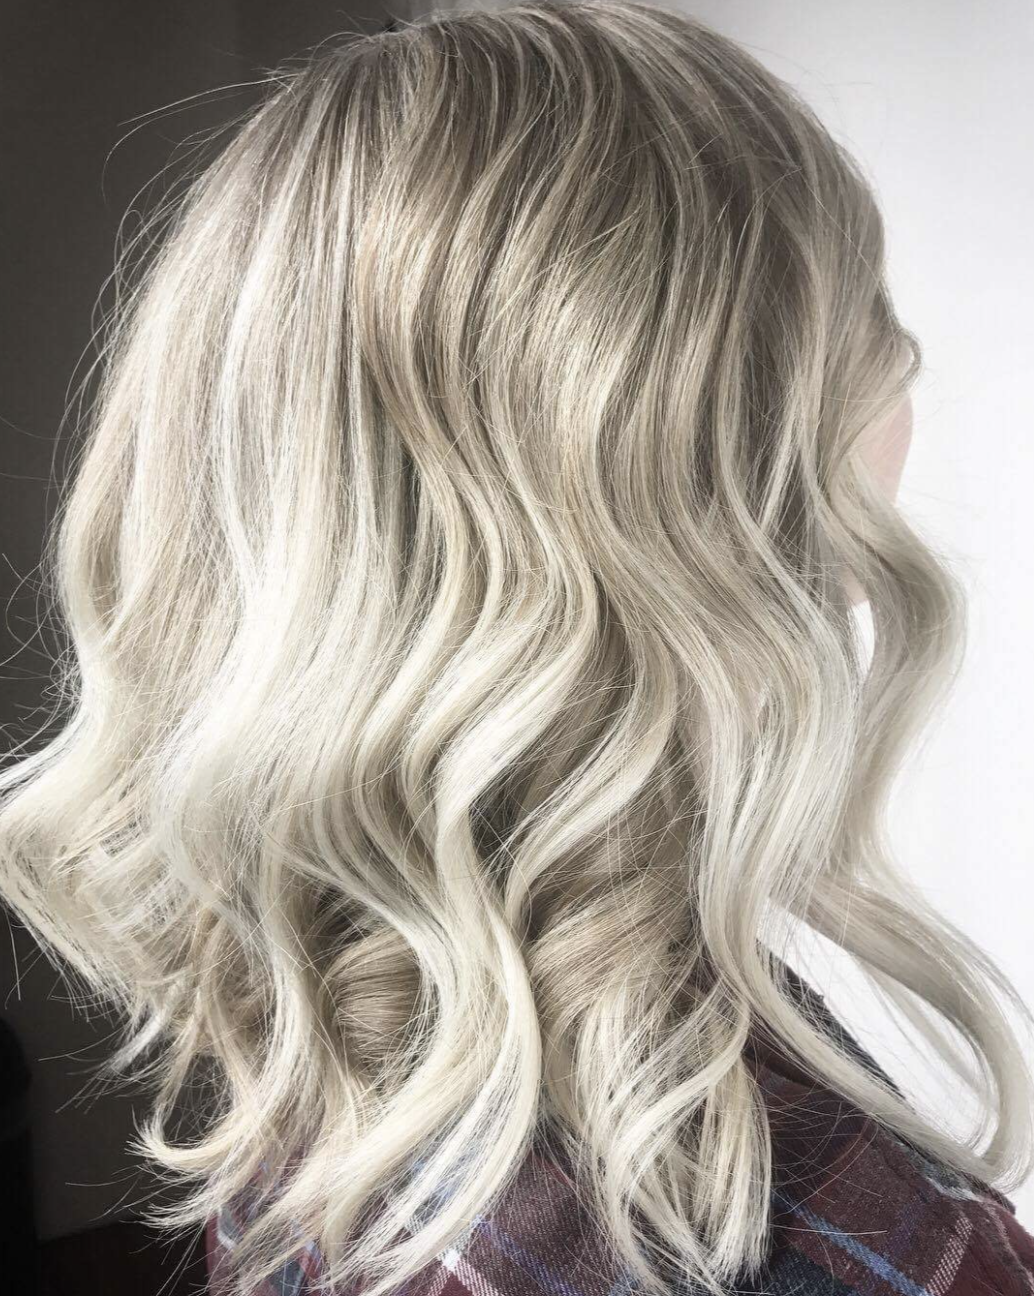 The Icy Balayage, by Maggie Leonhardt